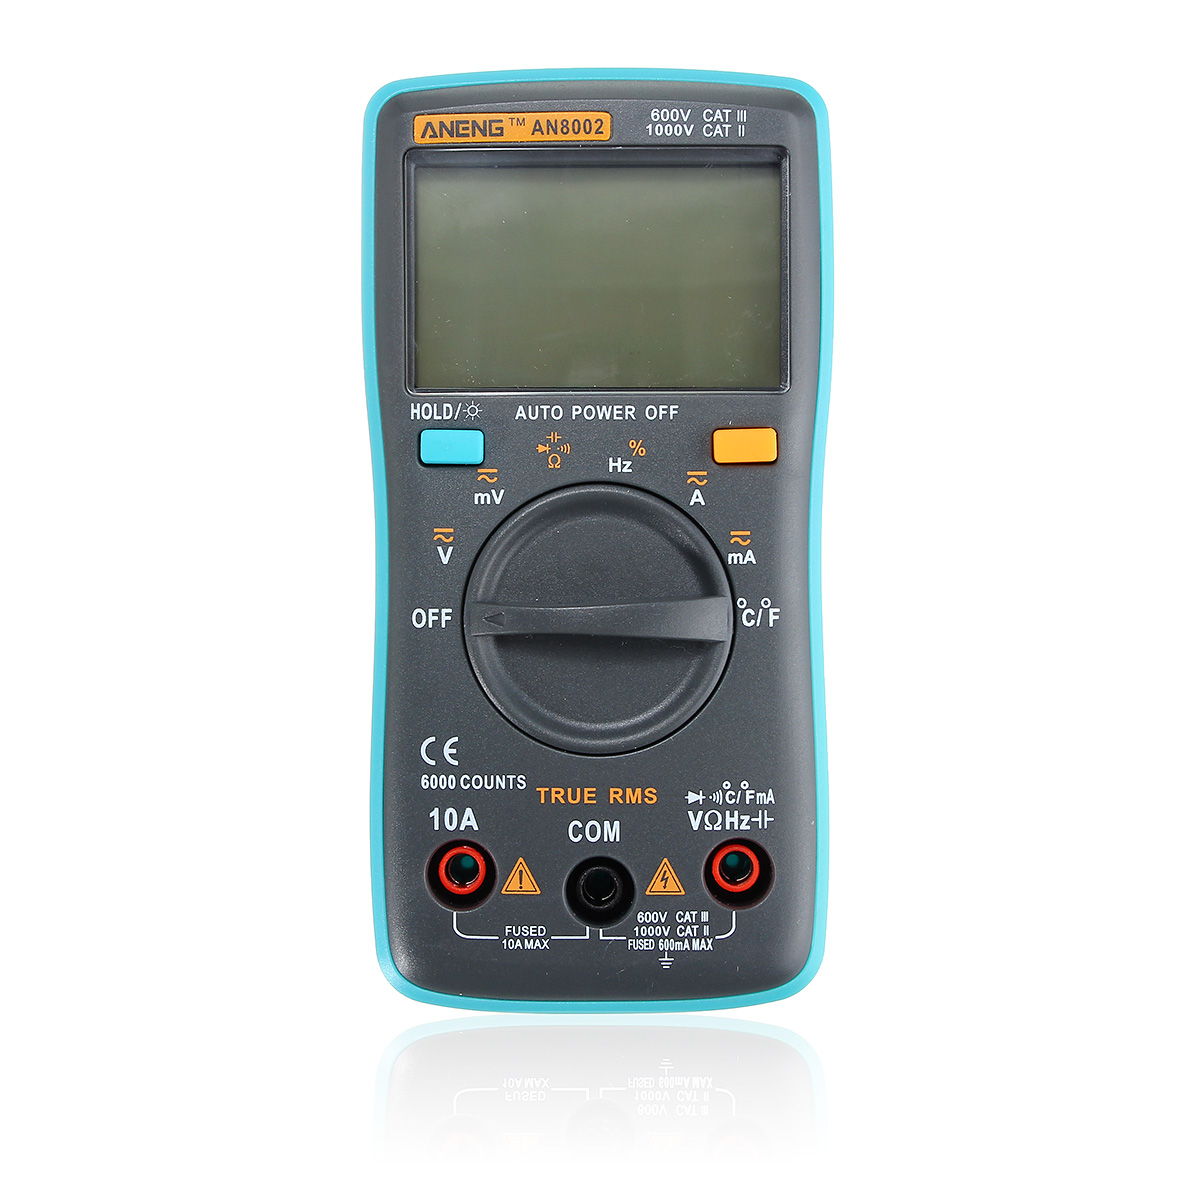 ANENG AN8002 Digital True RMS 6000 Counts Multimeter AC/DC Current Voltage Frequency Resistance Temperature Tester ℃/℉ 57